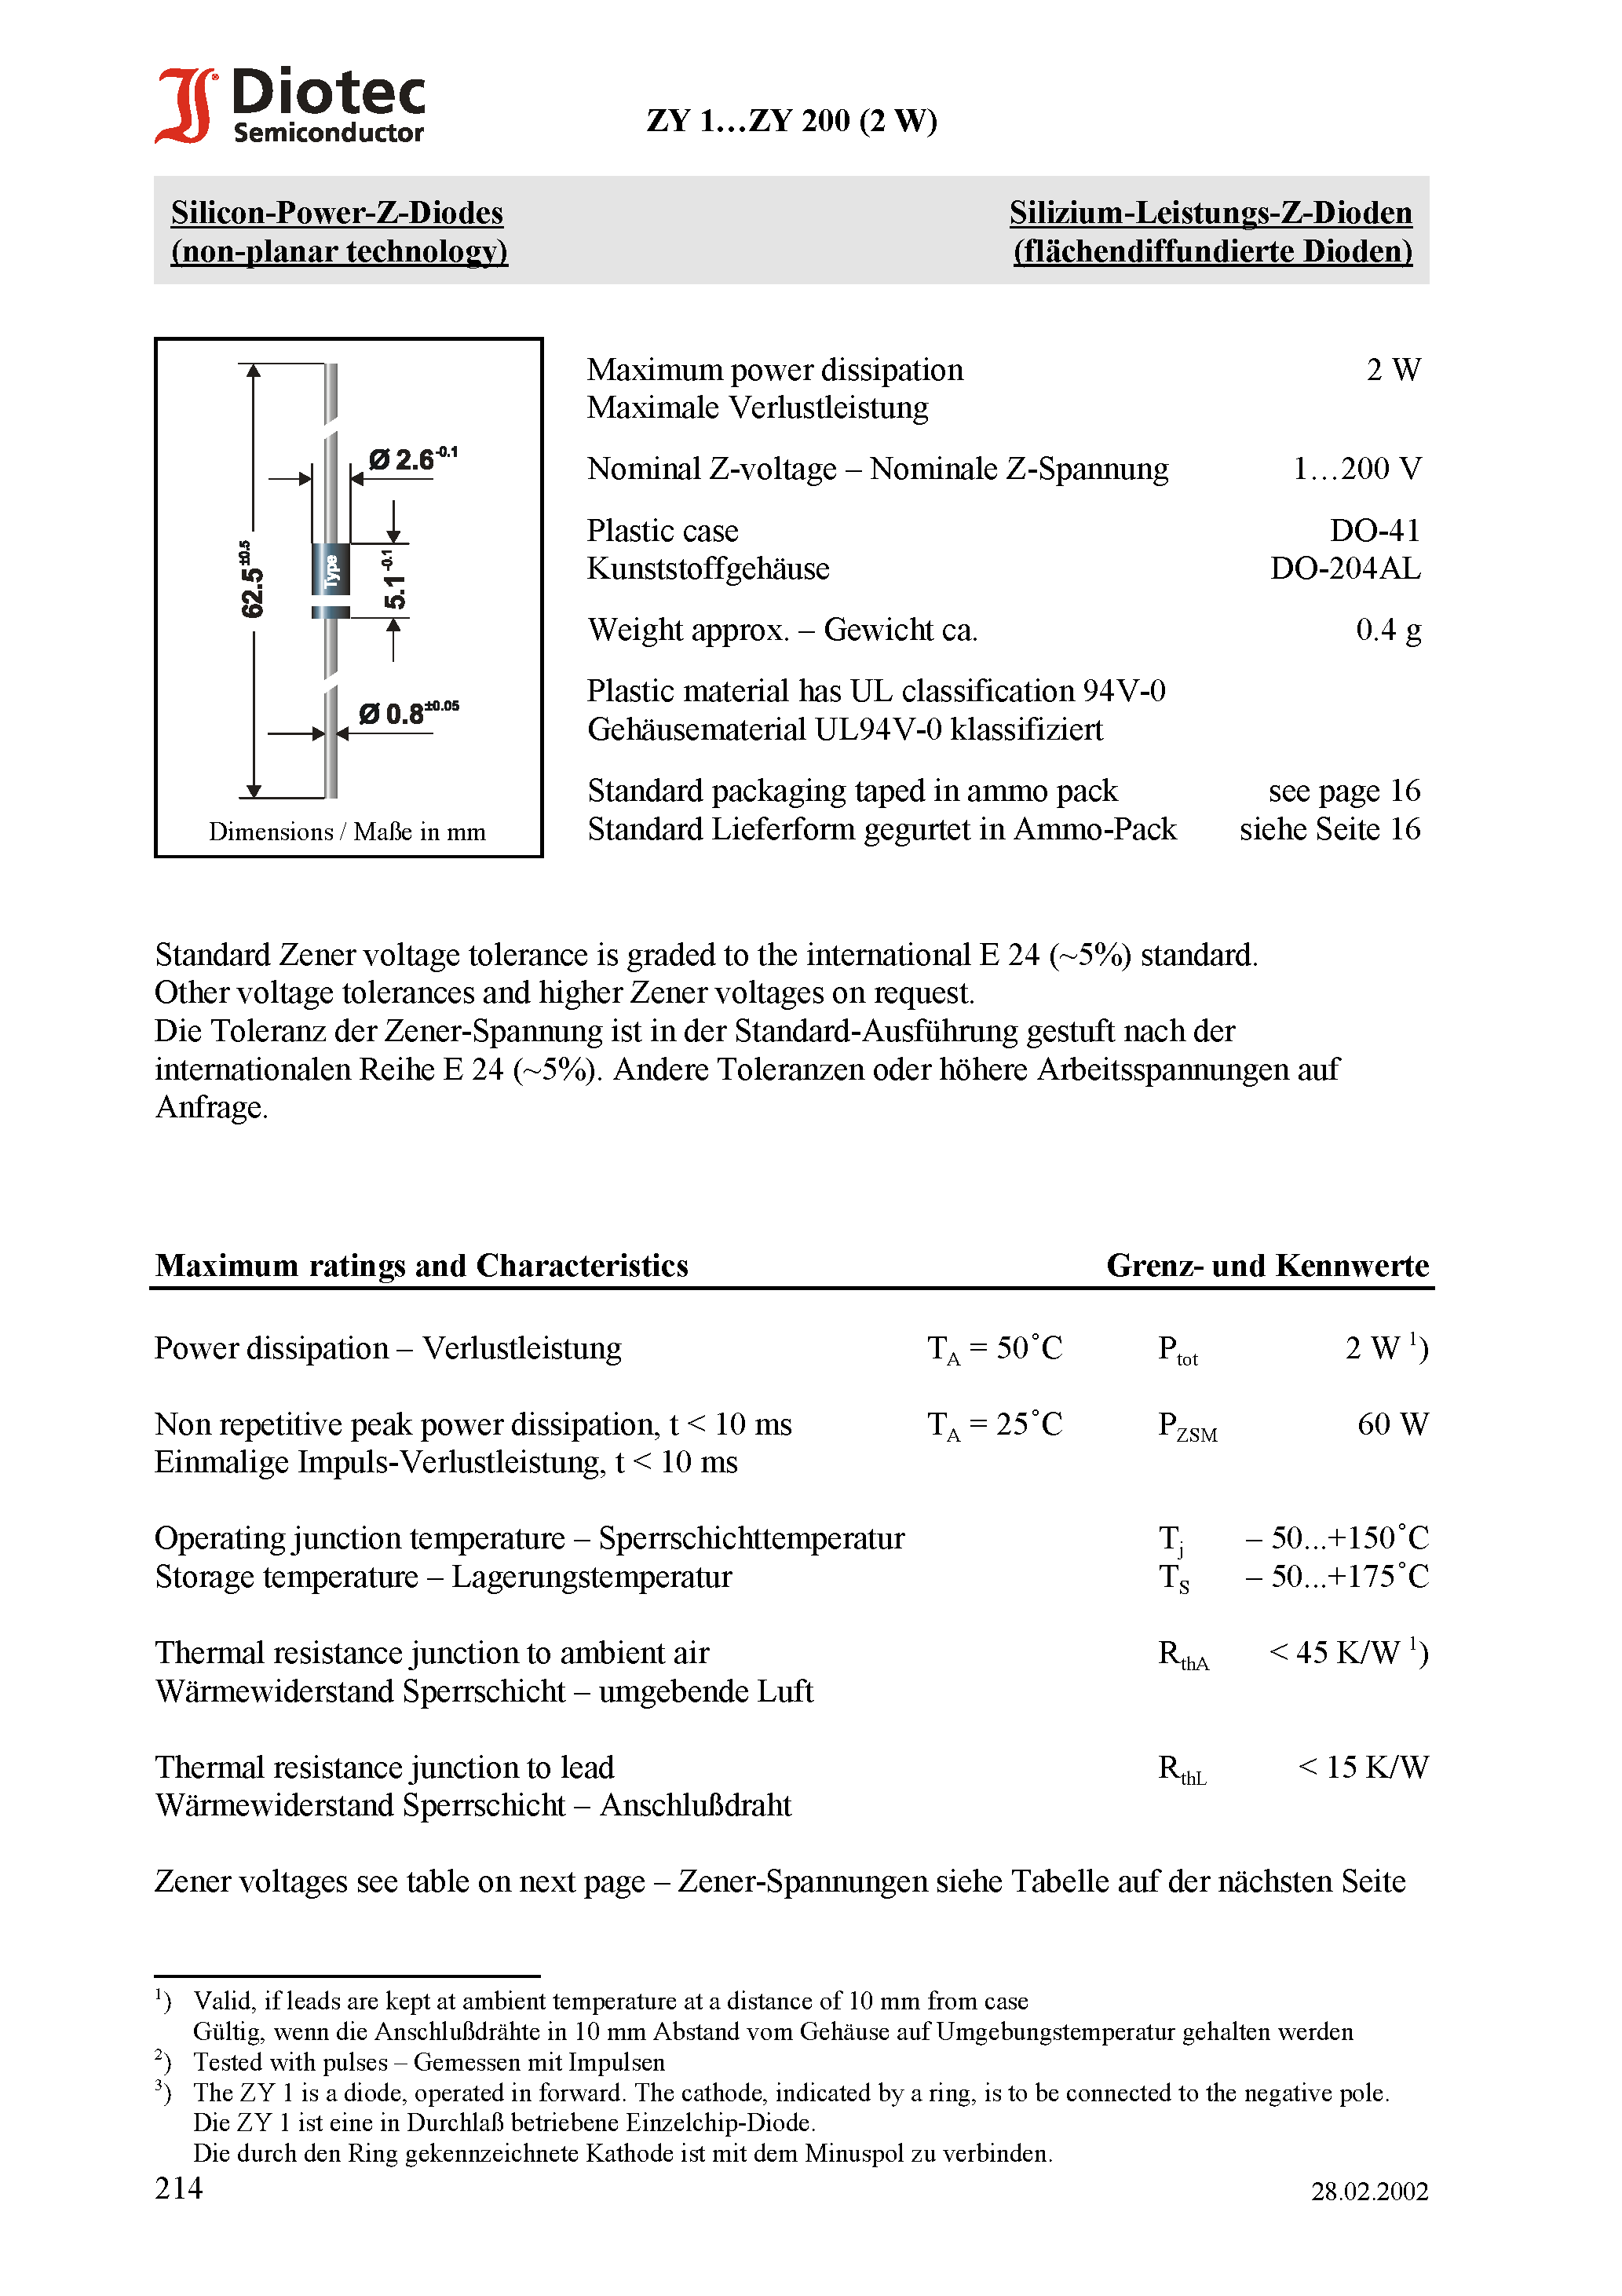 Datasheet ZY68 - Silicon-Power-Z-Diodes (non-planar technology) page 1